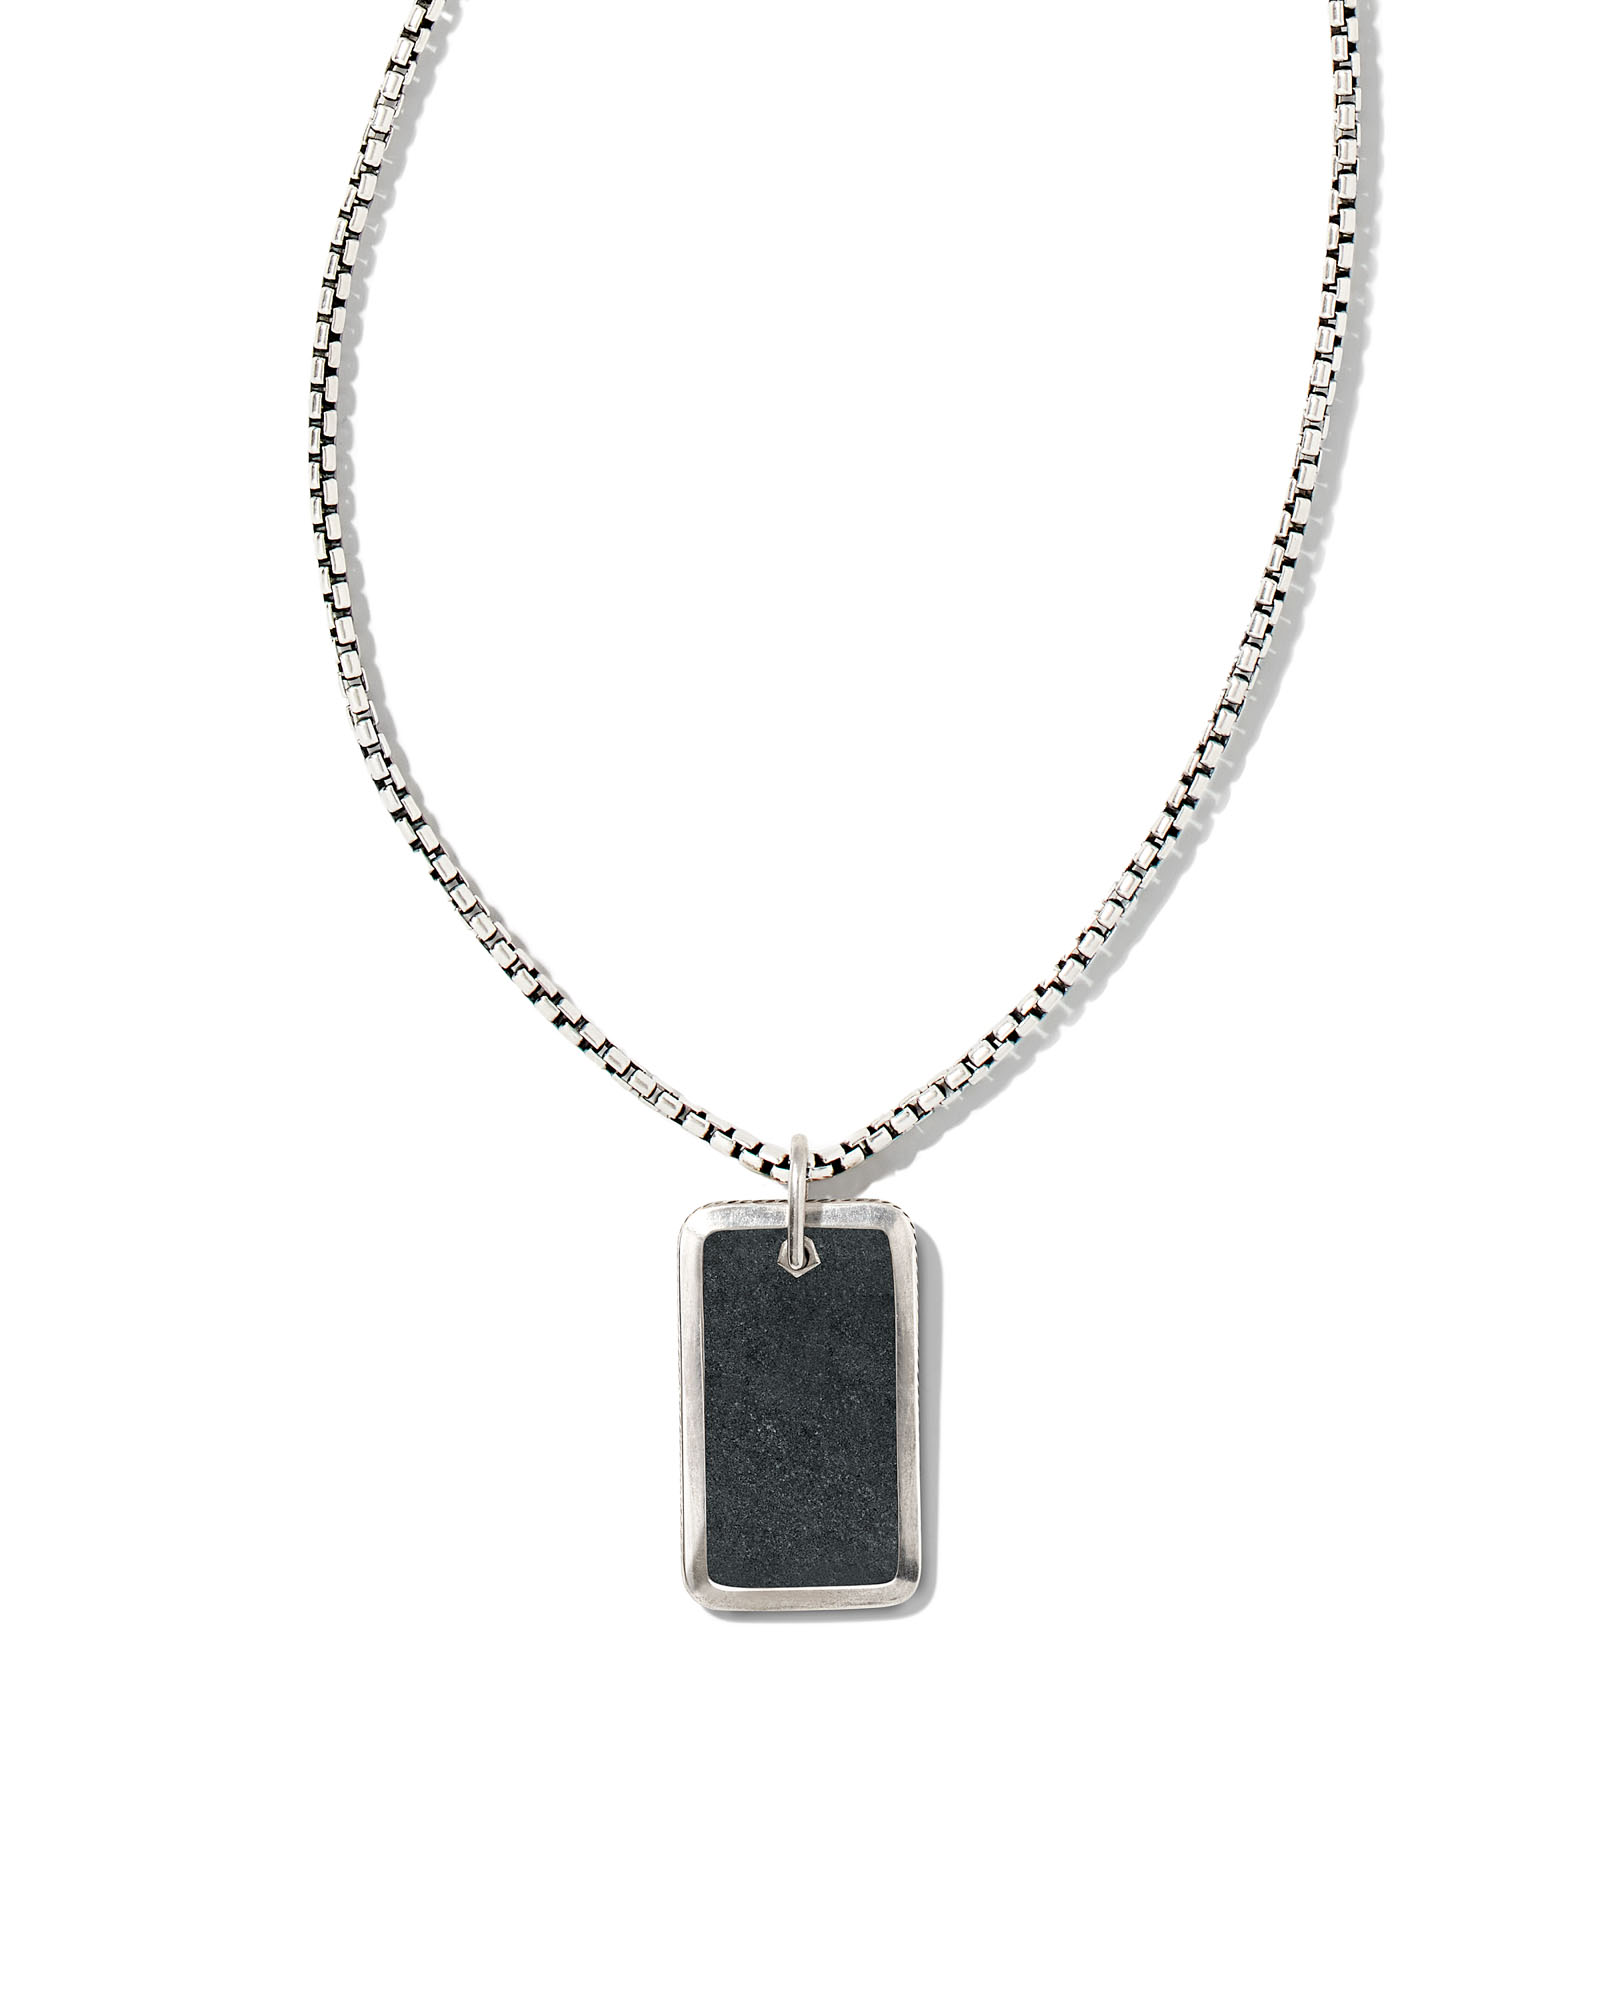 Ben Moss Stainless Steel Black Dogtag | Willowbrook Shopping Centre